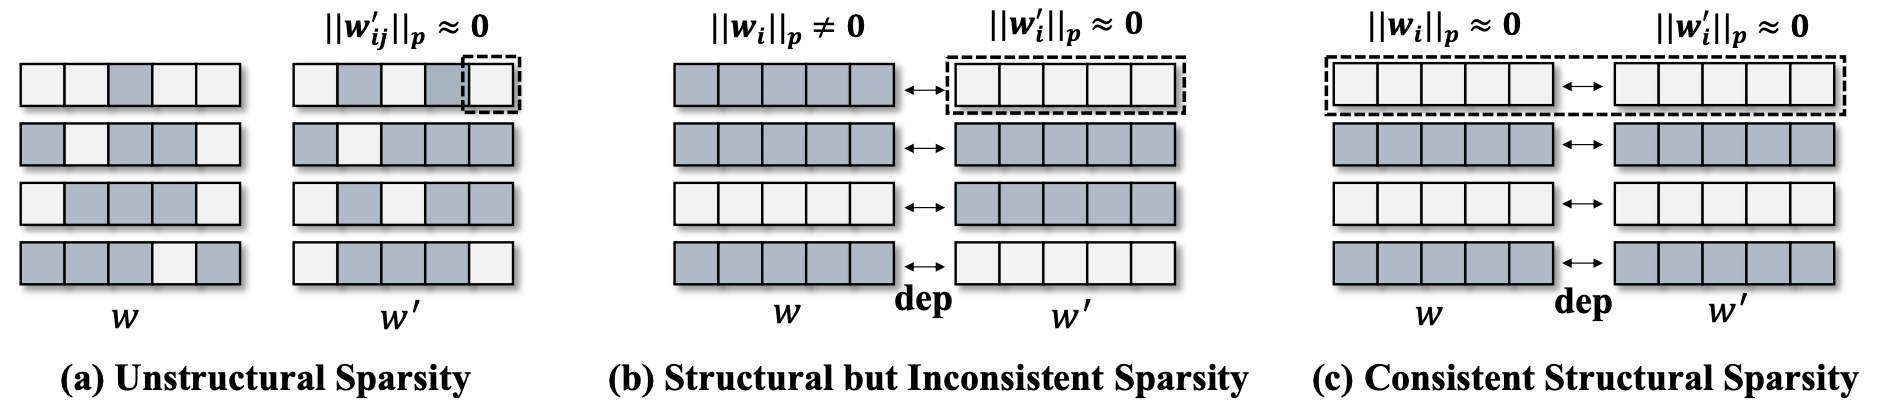 group_sparsity.png